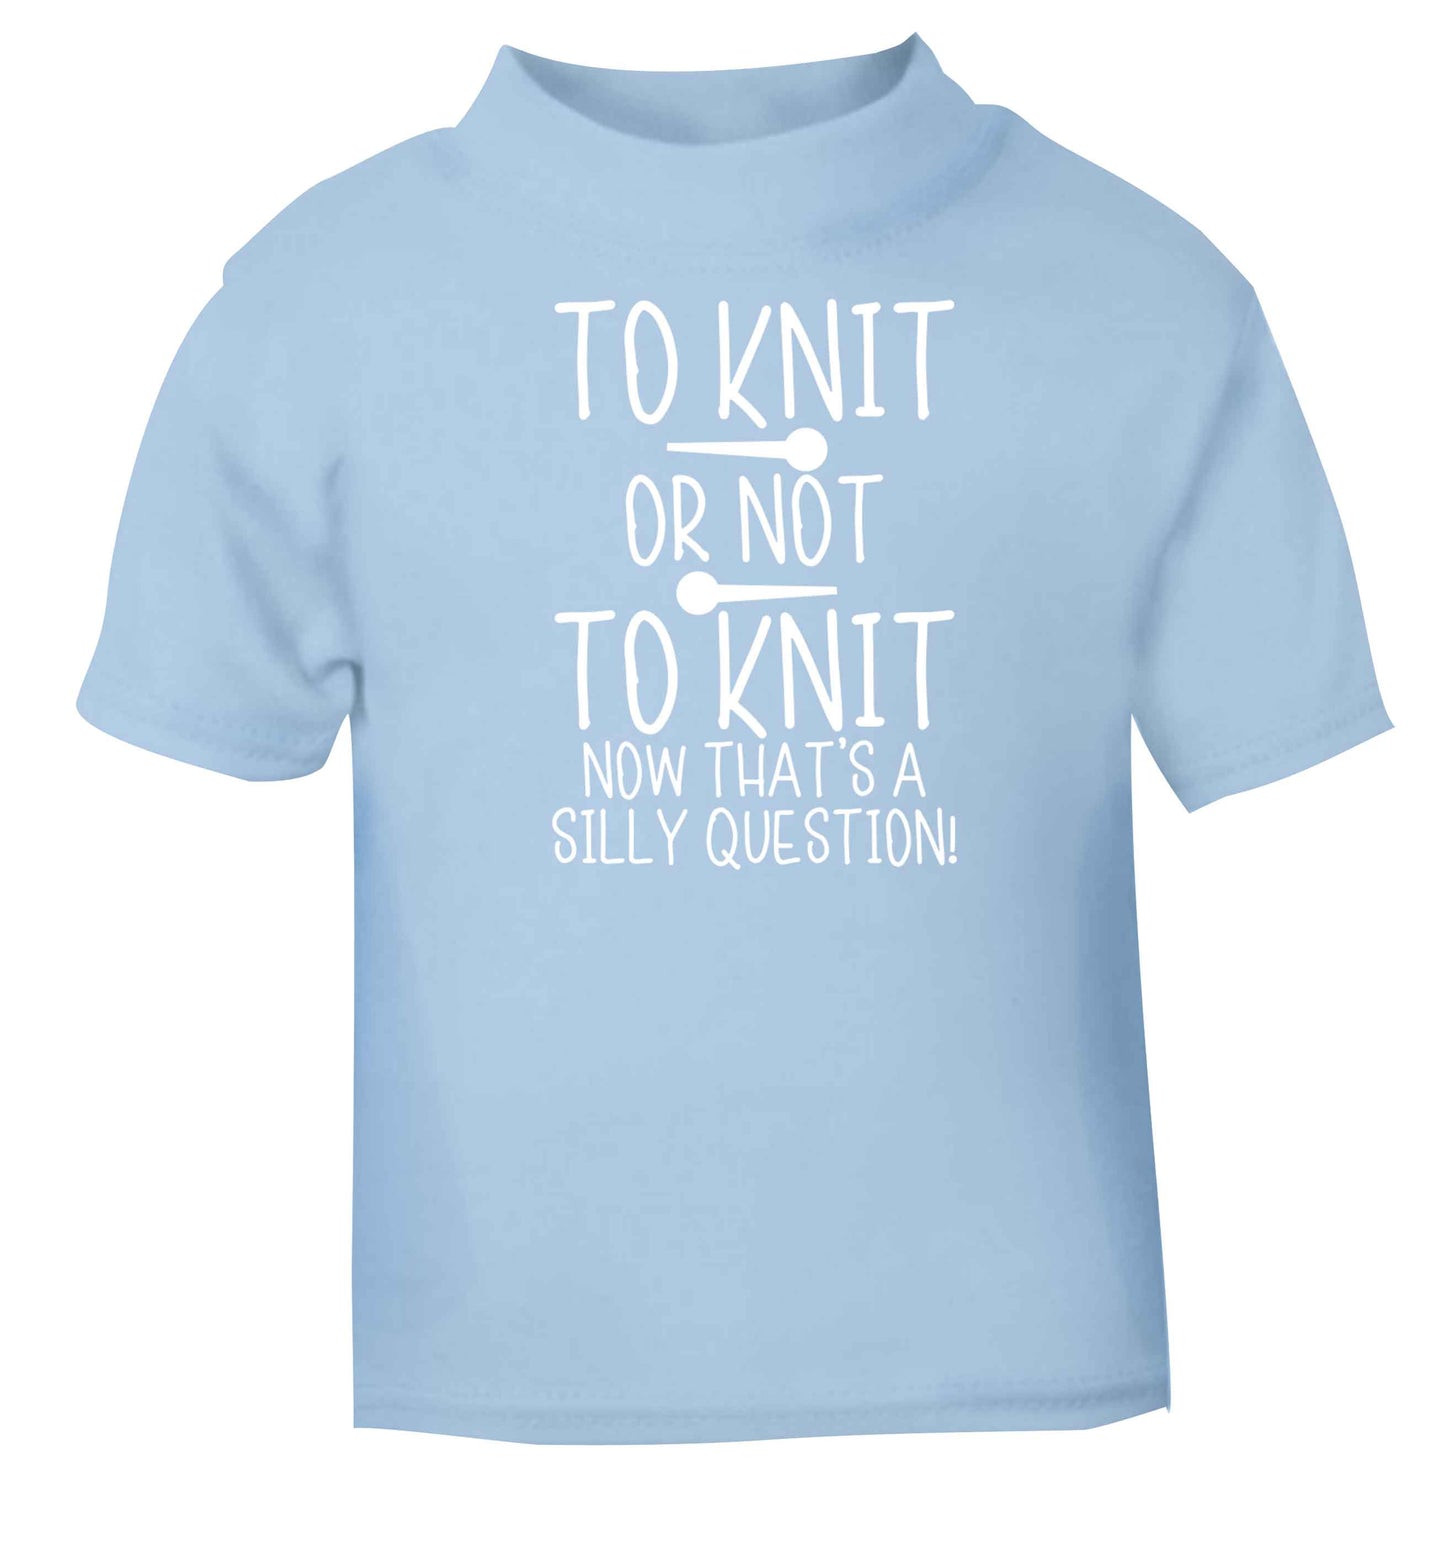 To knit or not to knit now that's a silly question light blue baby toddler Tshirt 2 Years